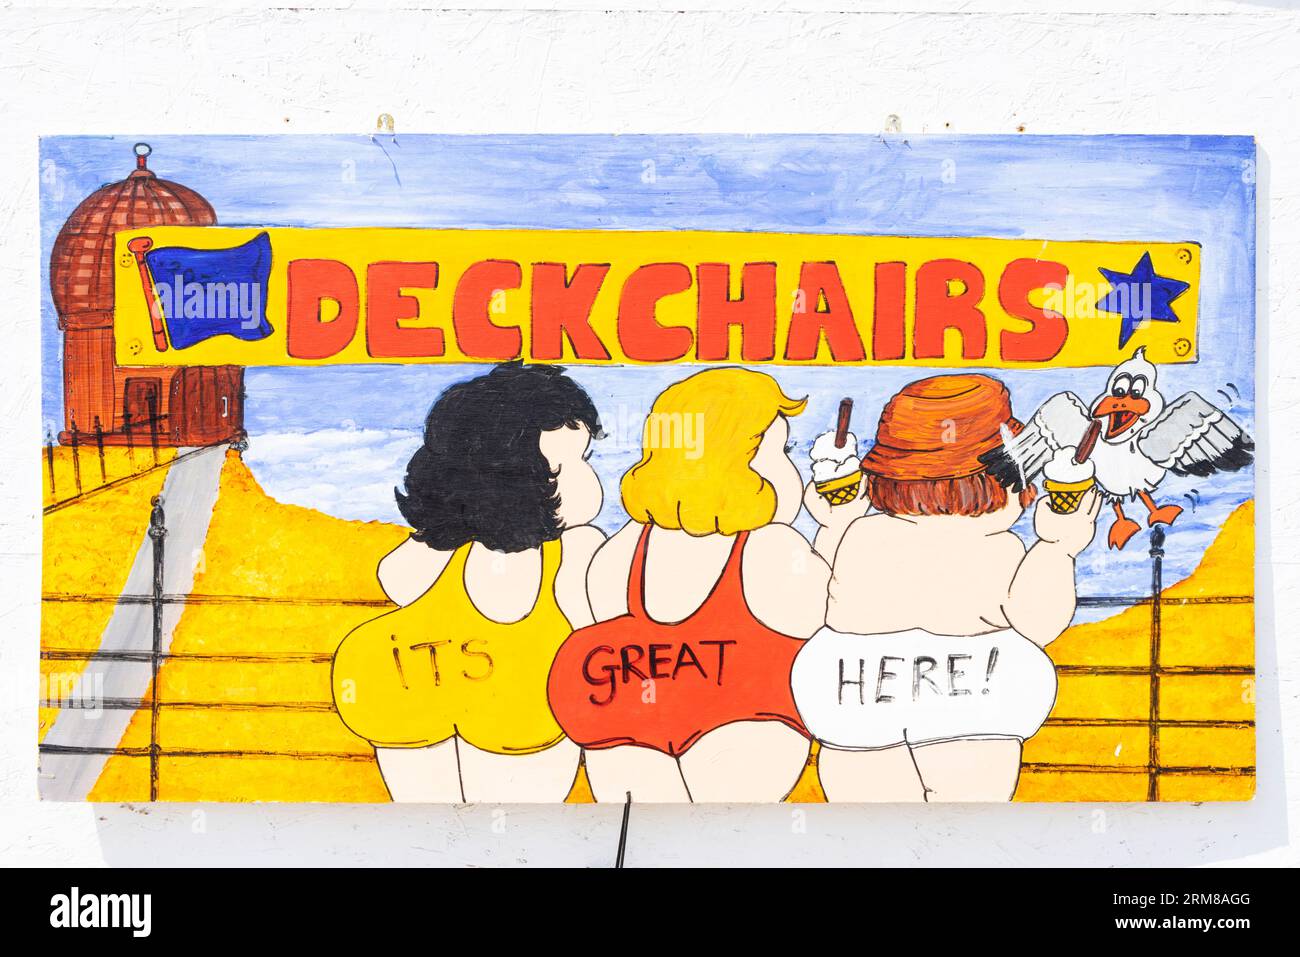 Cleethorpes amusing seaside artwork painted on a wall Cleethorpes Lincolnshire England UK GB Europe Stock Photo